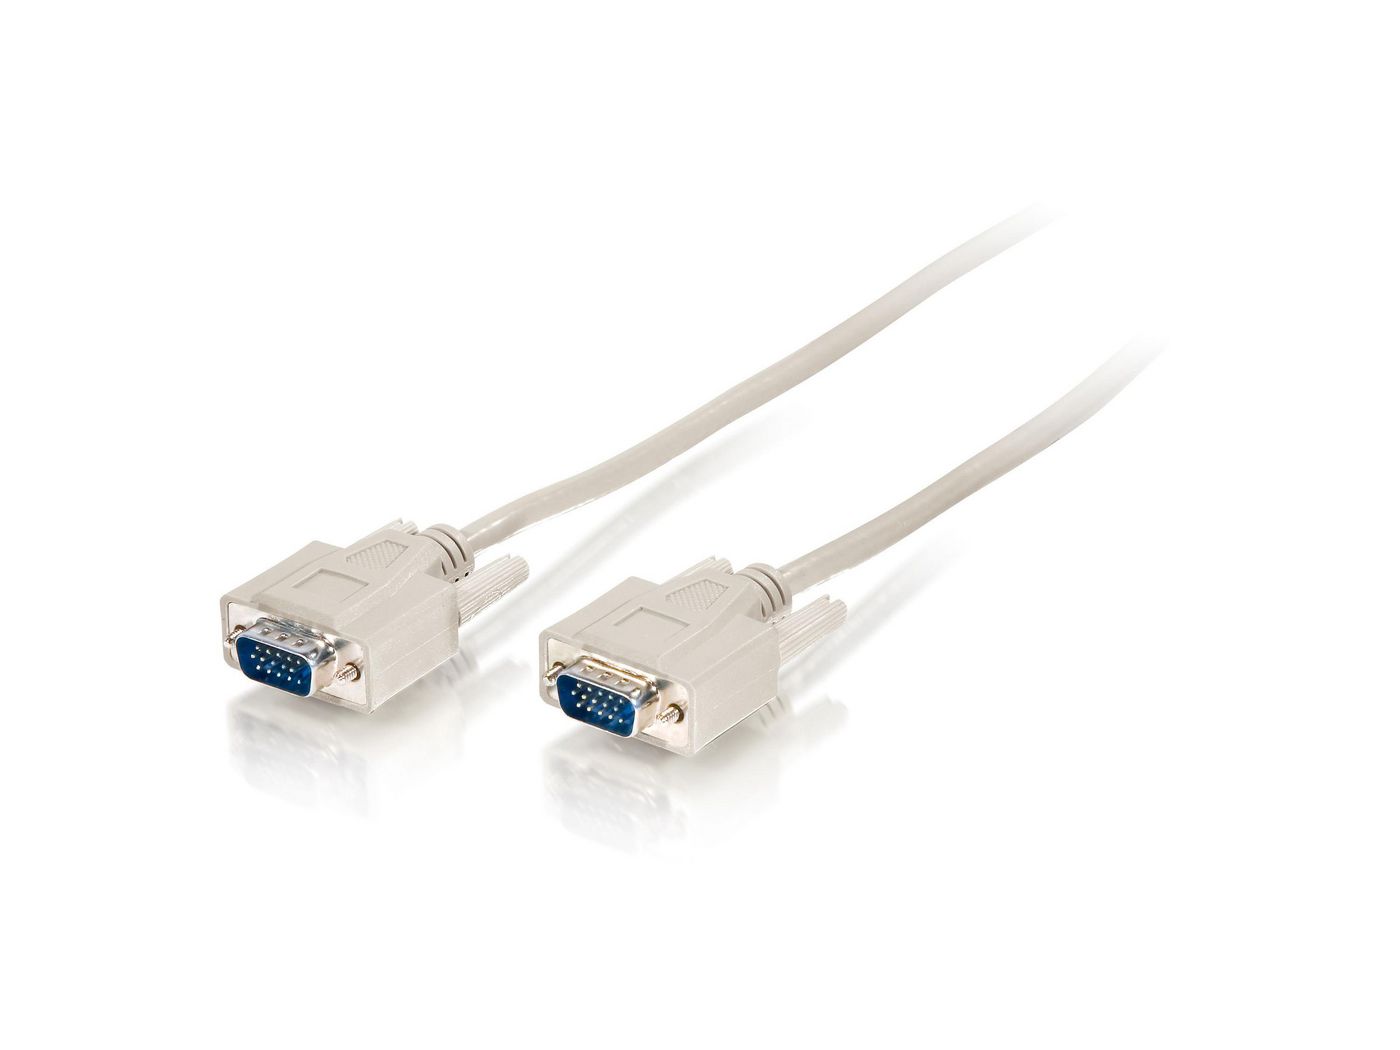 ACC-2109 KVLevelOne Daisy-Chain Cable 0 